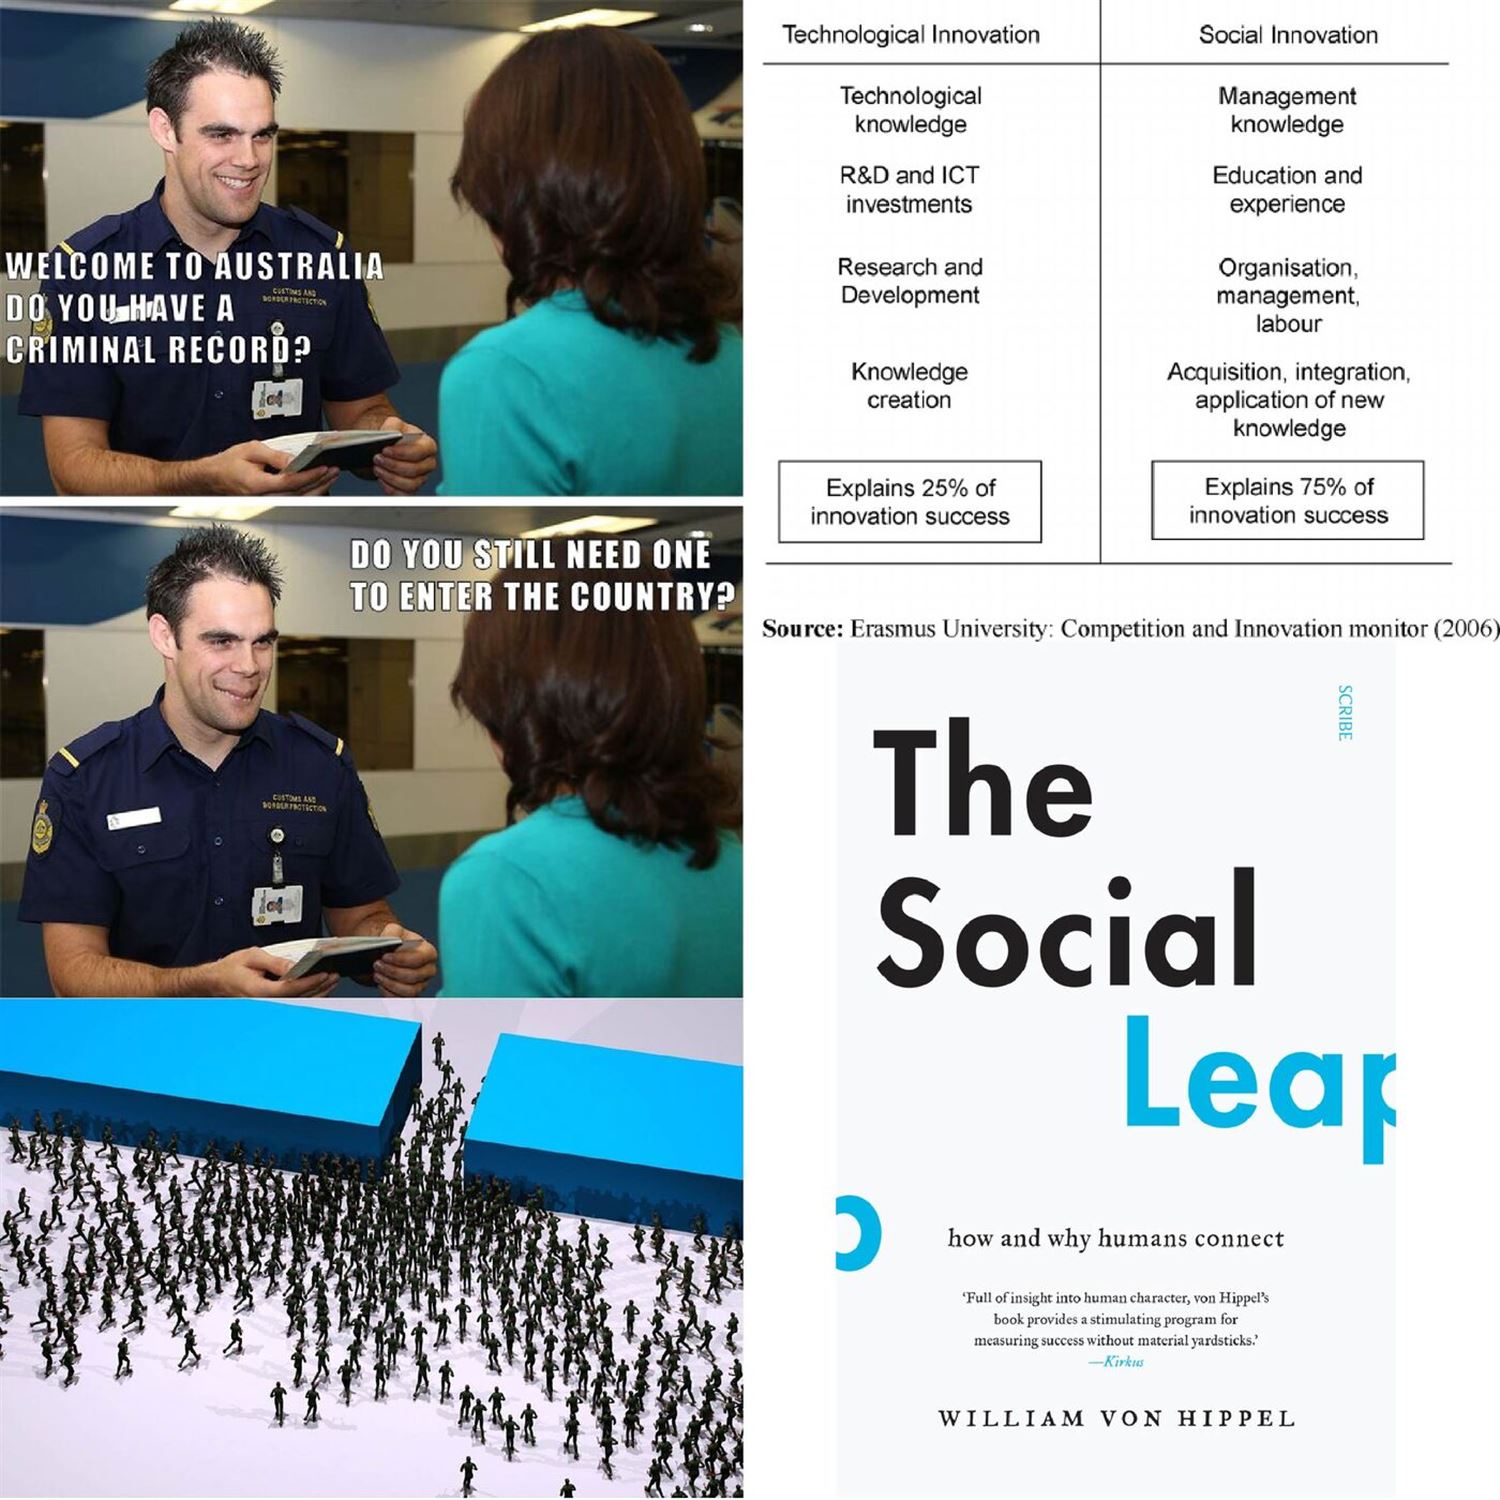 The Social Leap story